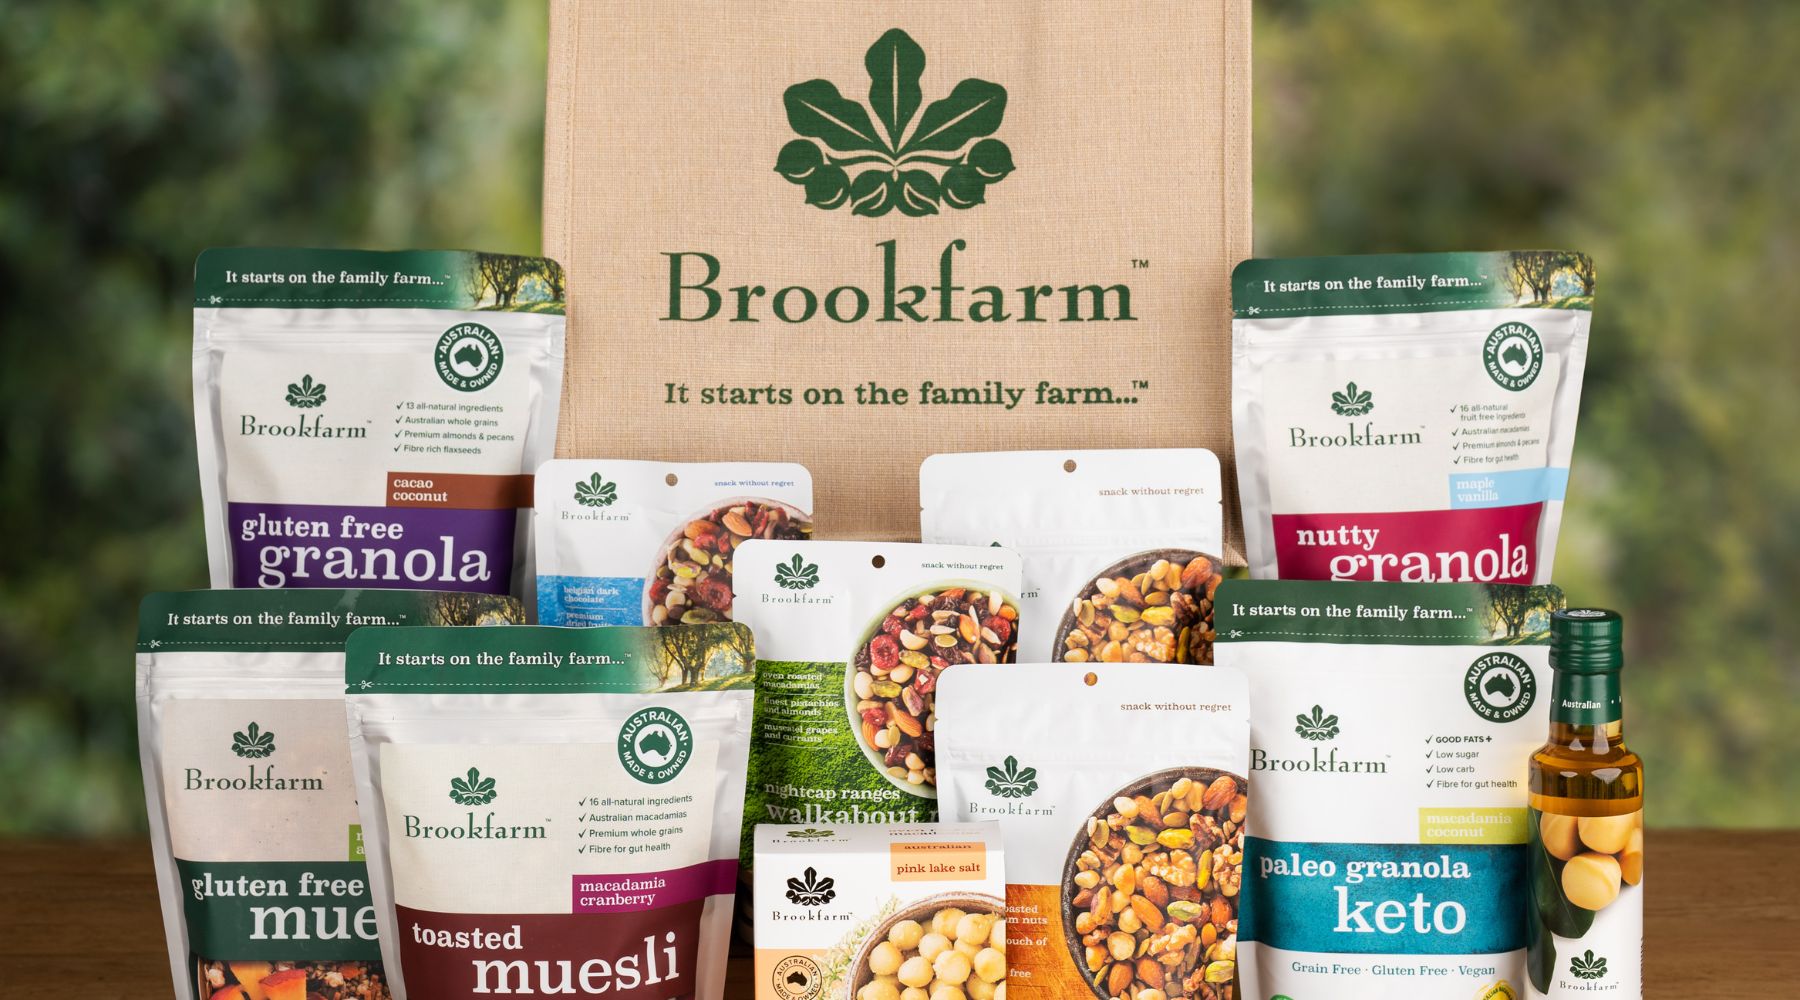 Australian Made Gift Hampers filled with Gourmet Macadamia Muesli Granola and Premium Nut mixes and snacks